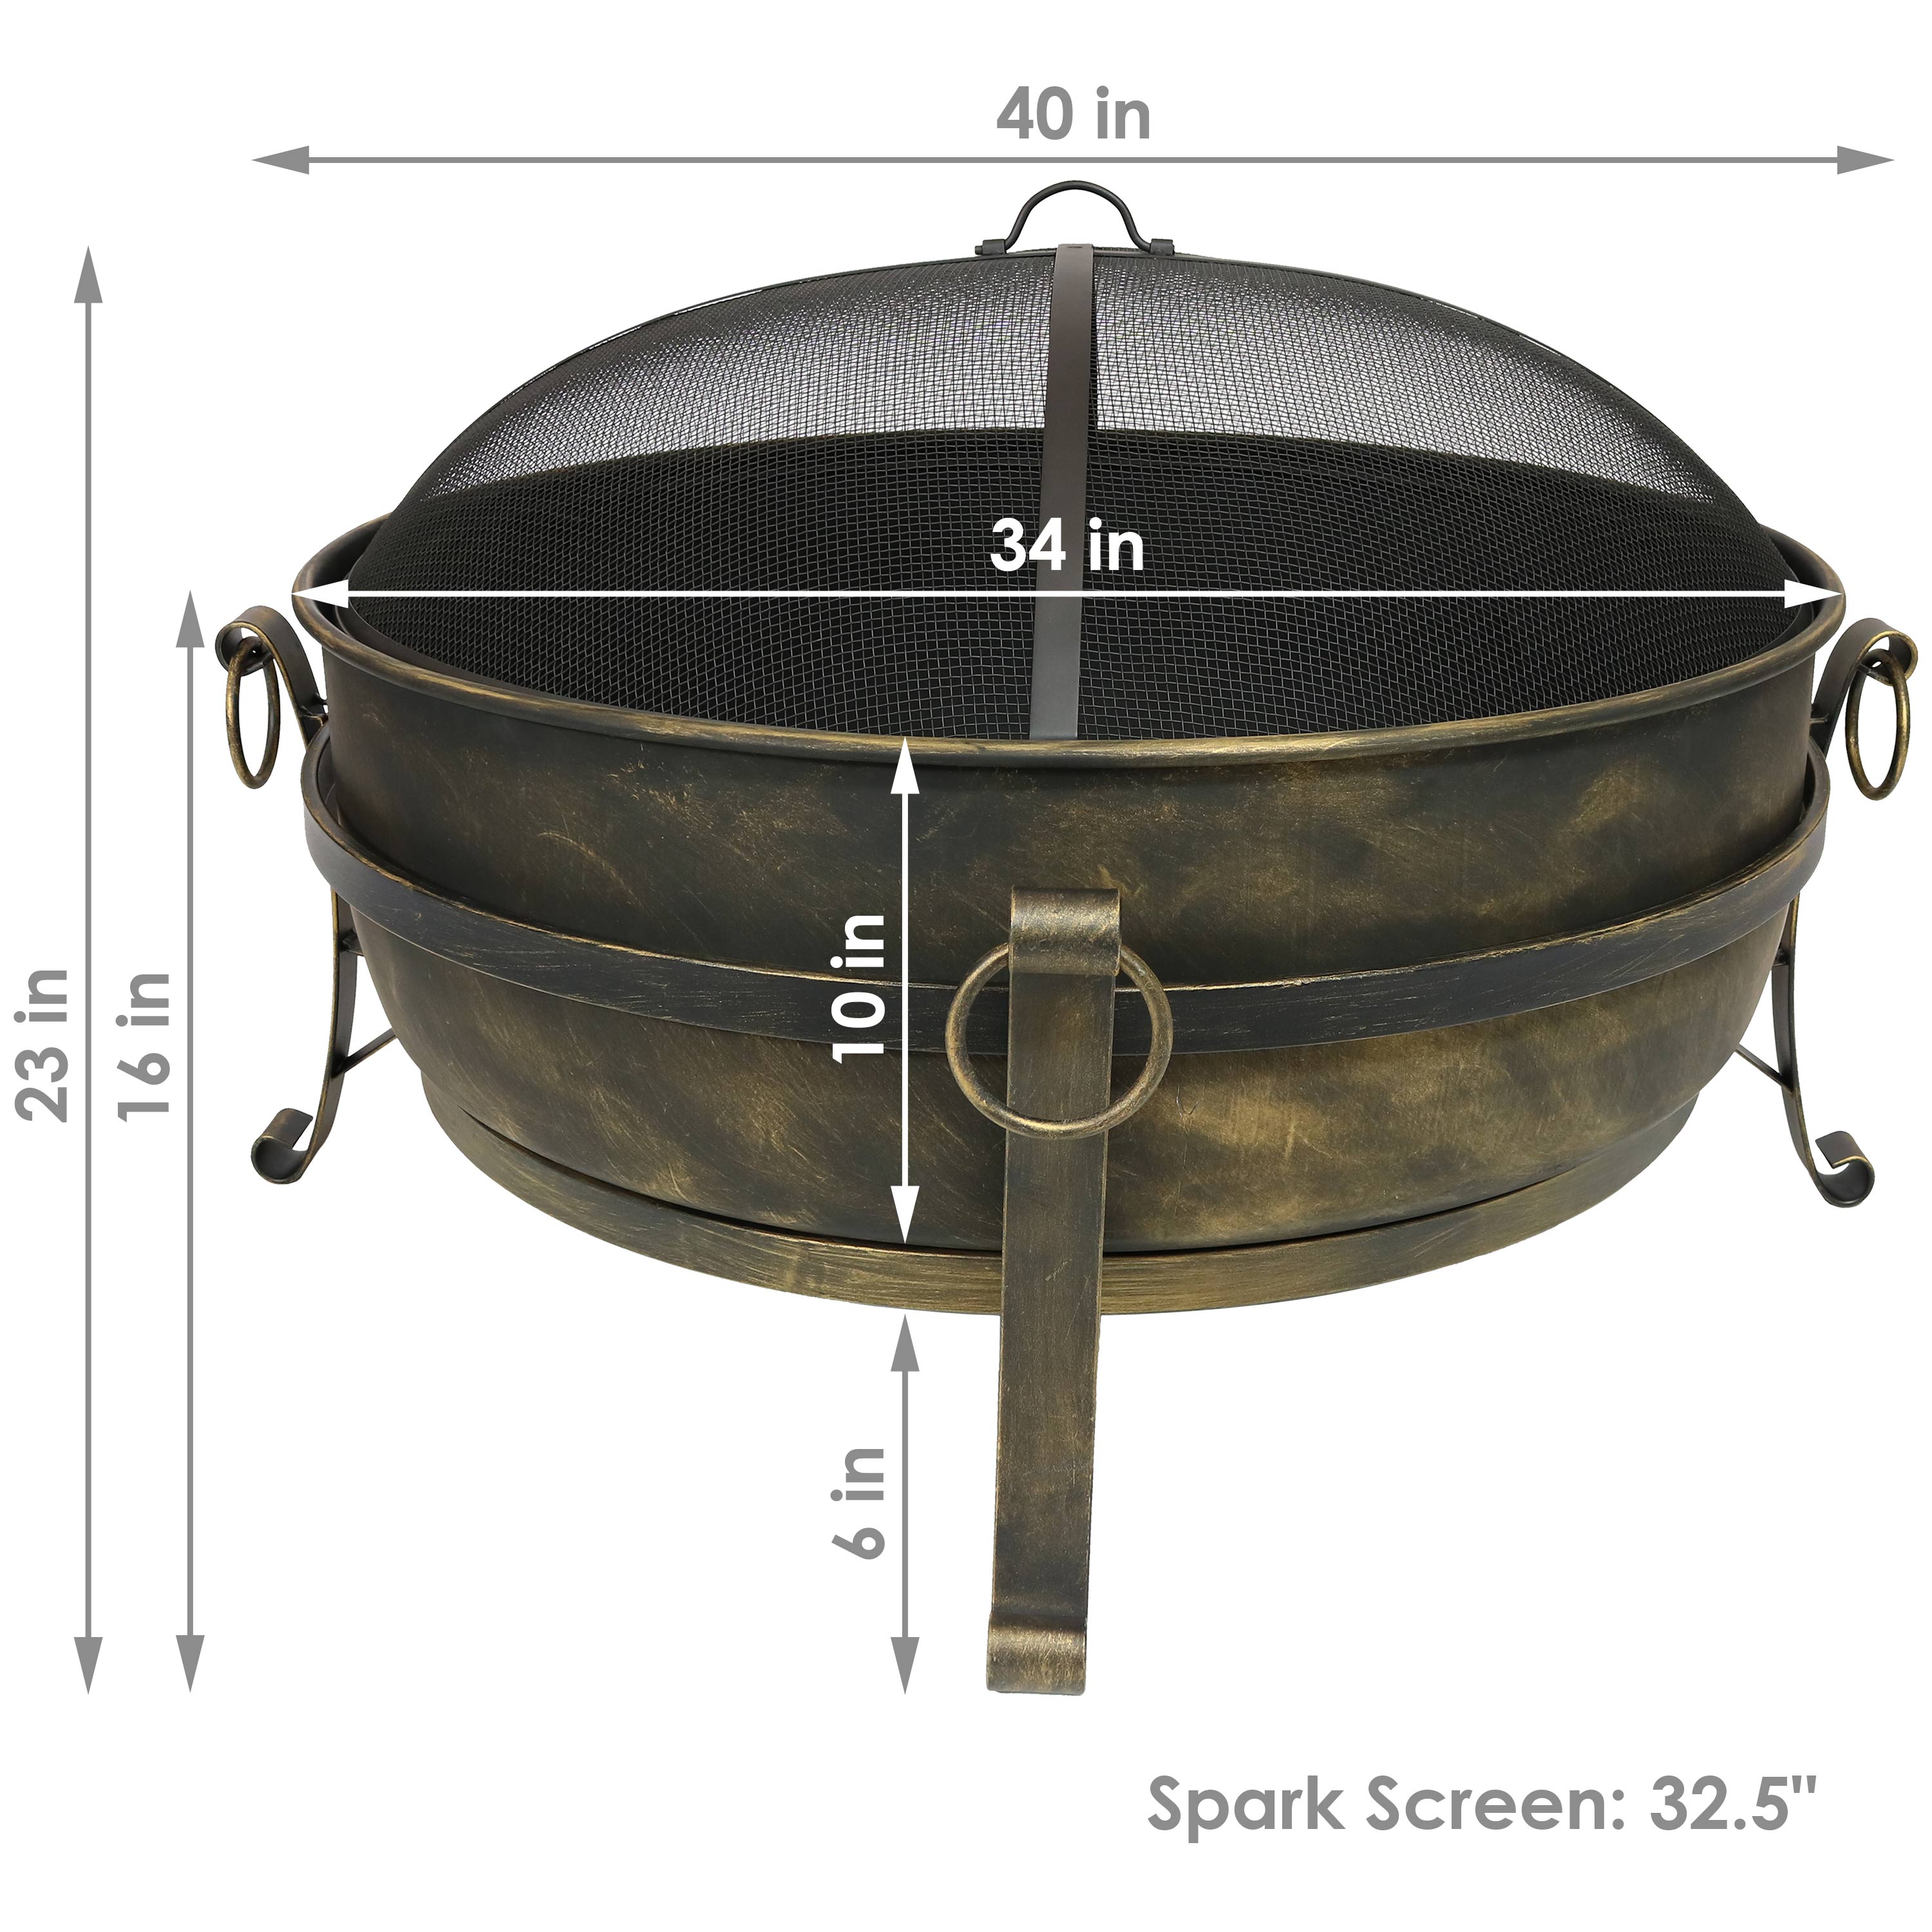 Sunnydaze Large Outdoor Cauldron Fire Pit with Spark Screen - 34" - image 3 of 9